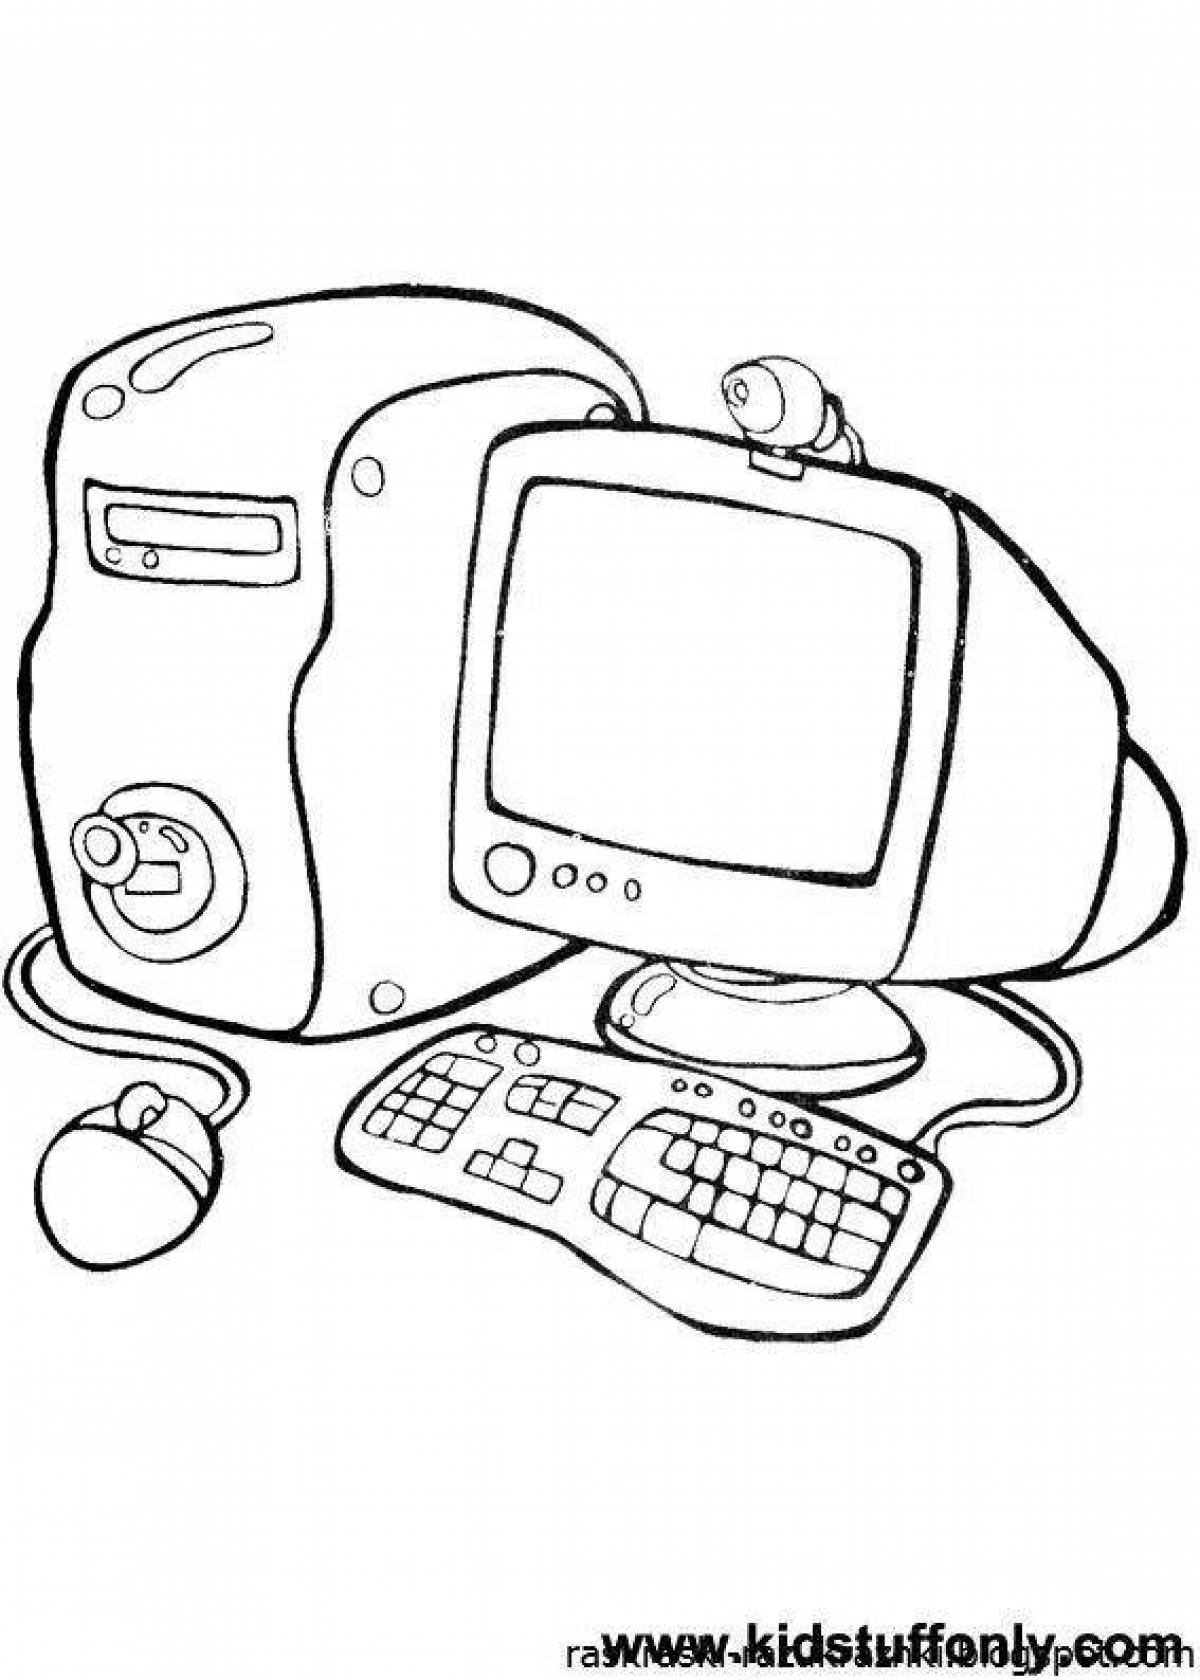 Wonderful computer mouse coloring pages for girls